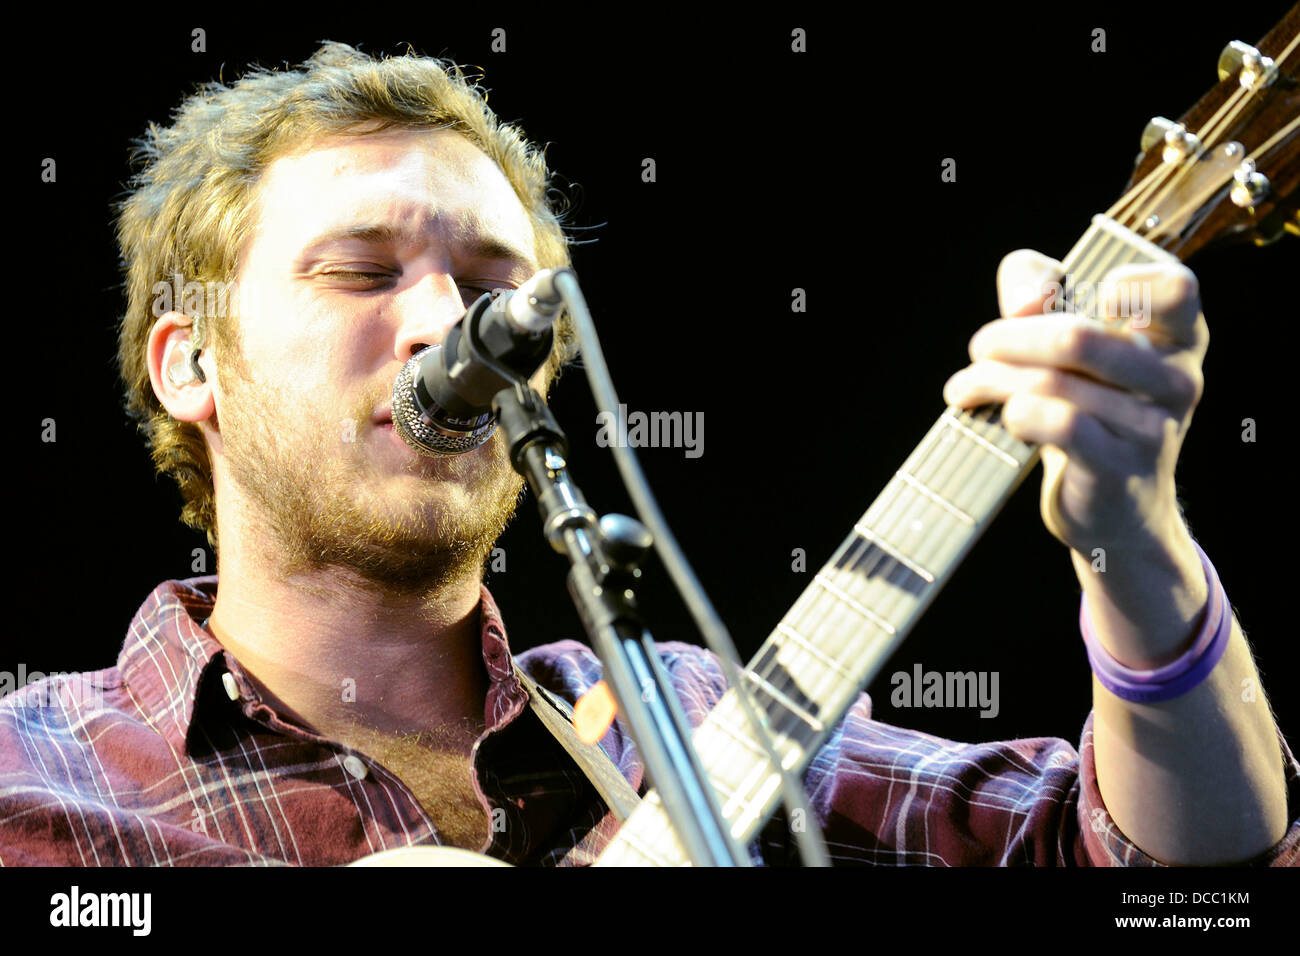 Toronto, Canada. 14th Aug, 2013. American Idol Phillip Phillips performs at Molson Canadian Amphitheatre as the opening act for John Mayer's BORN AND RAISED WORLD TOUR. © EXImages/Alamy Live News Stock Photo